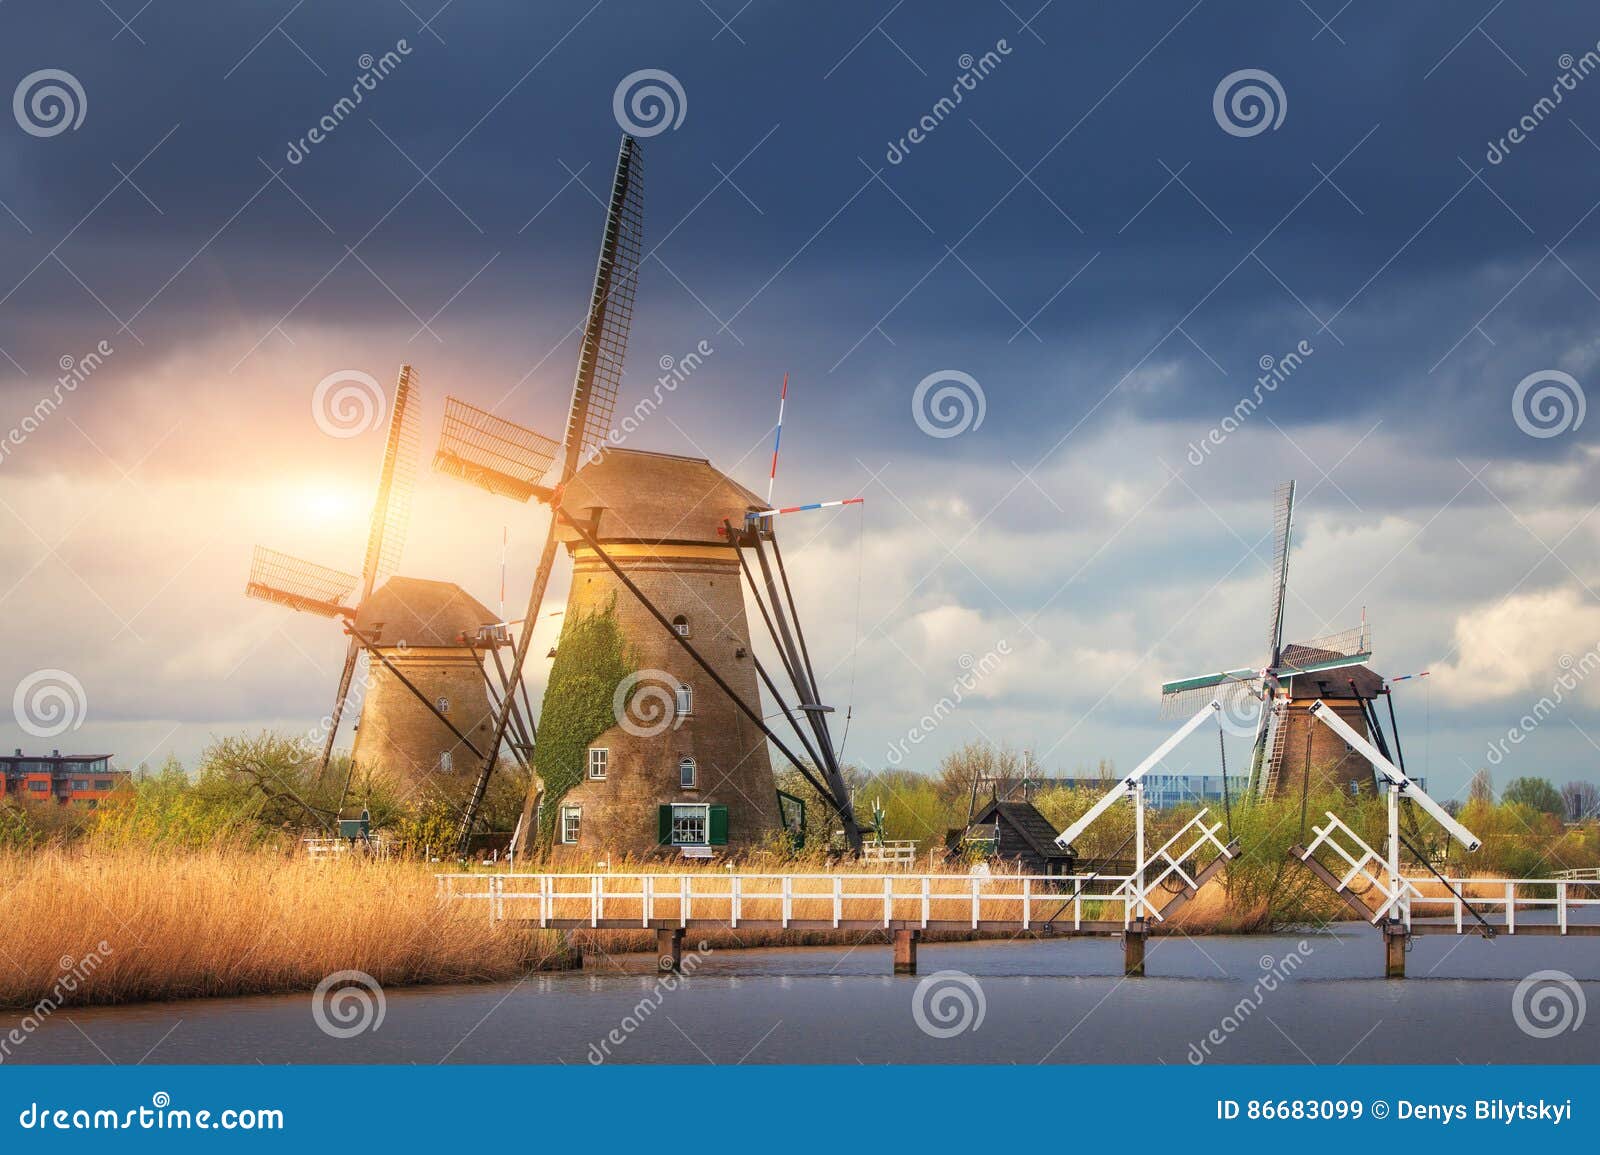 windmills against cloudy sky at sunset in kinderdijk, netherland